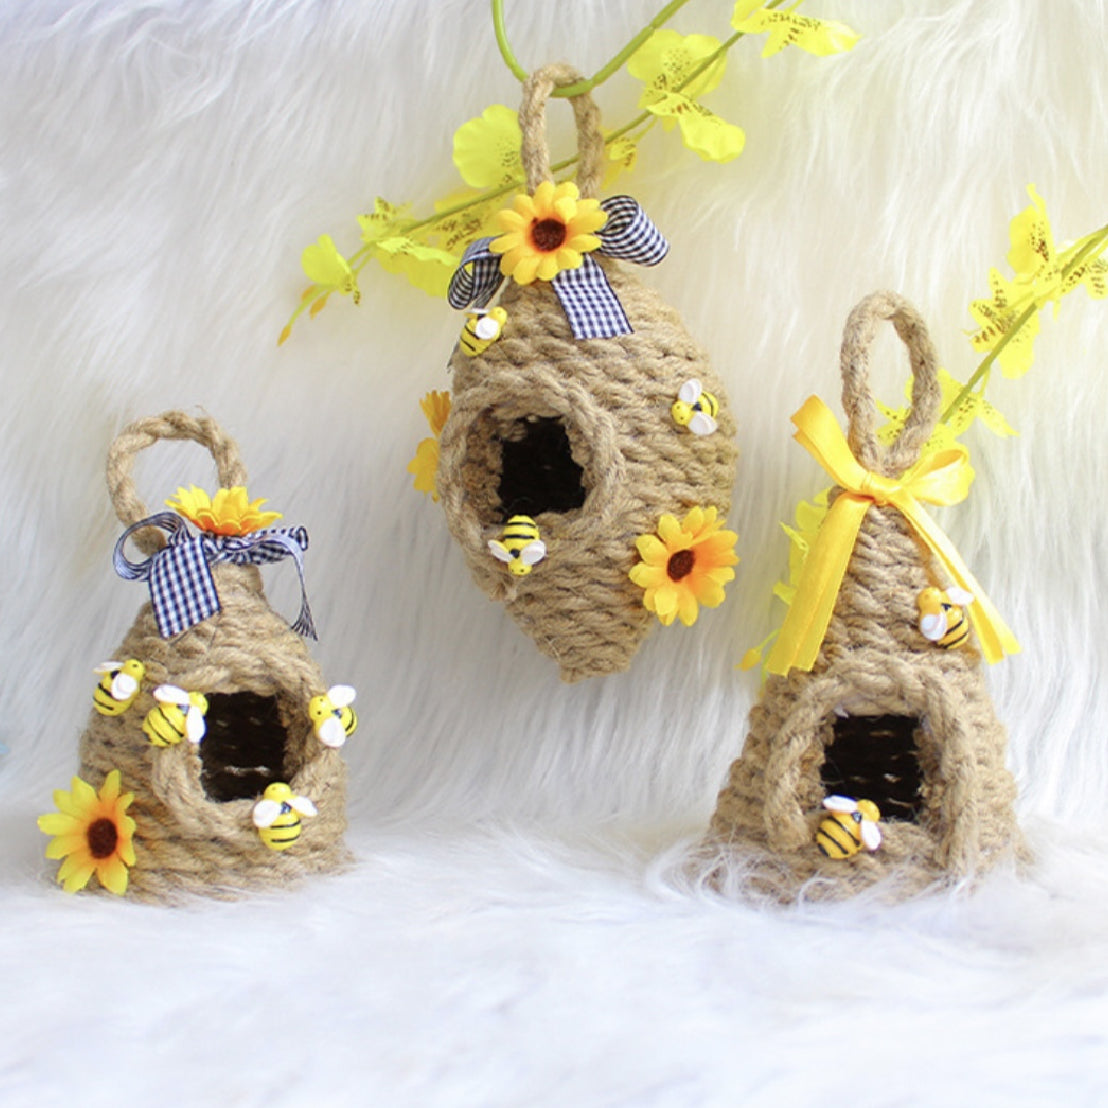 Sunflower Round Honeycomb Decoration, 3.94 x 7.09 Inches, Beehive Woven Hemp Rope Honeycomb Hanging Ring Balcony Decor, Farmhouse Spring Decor Bee-Themed Party